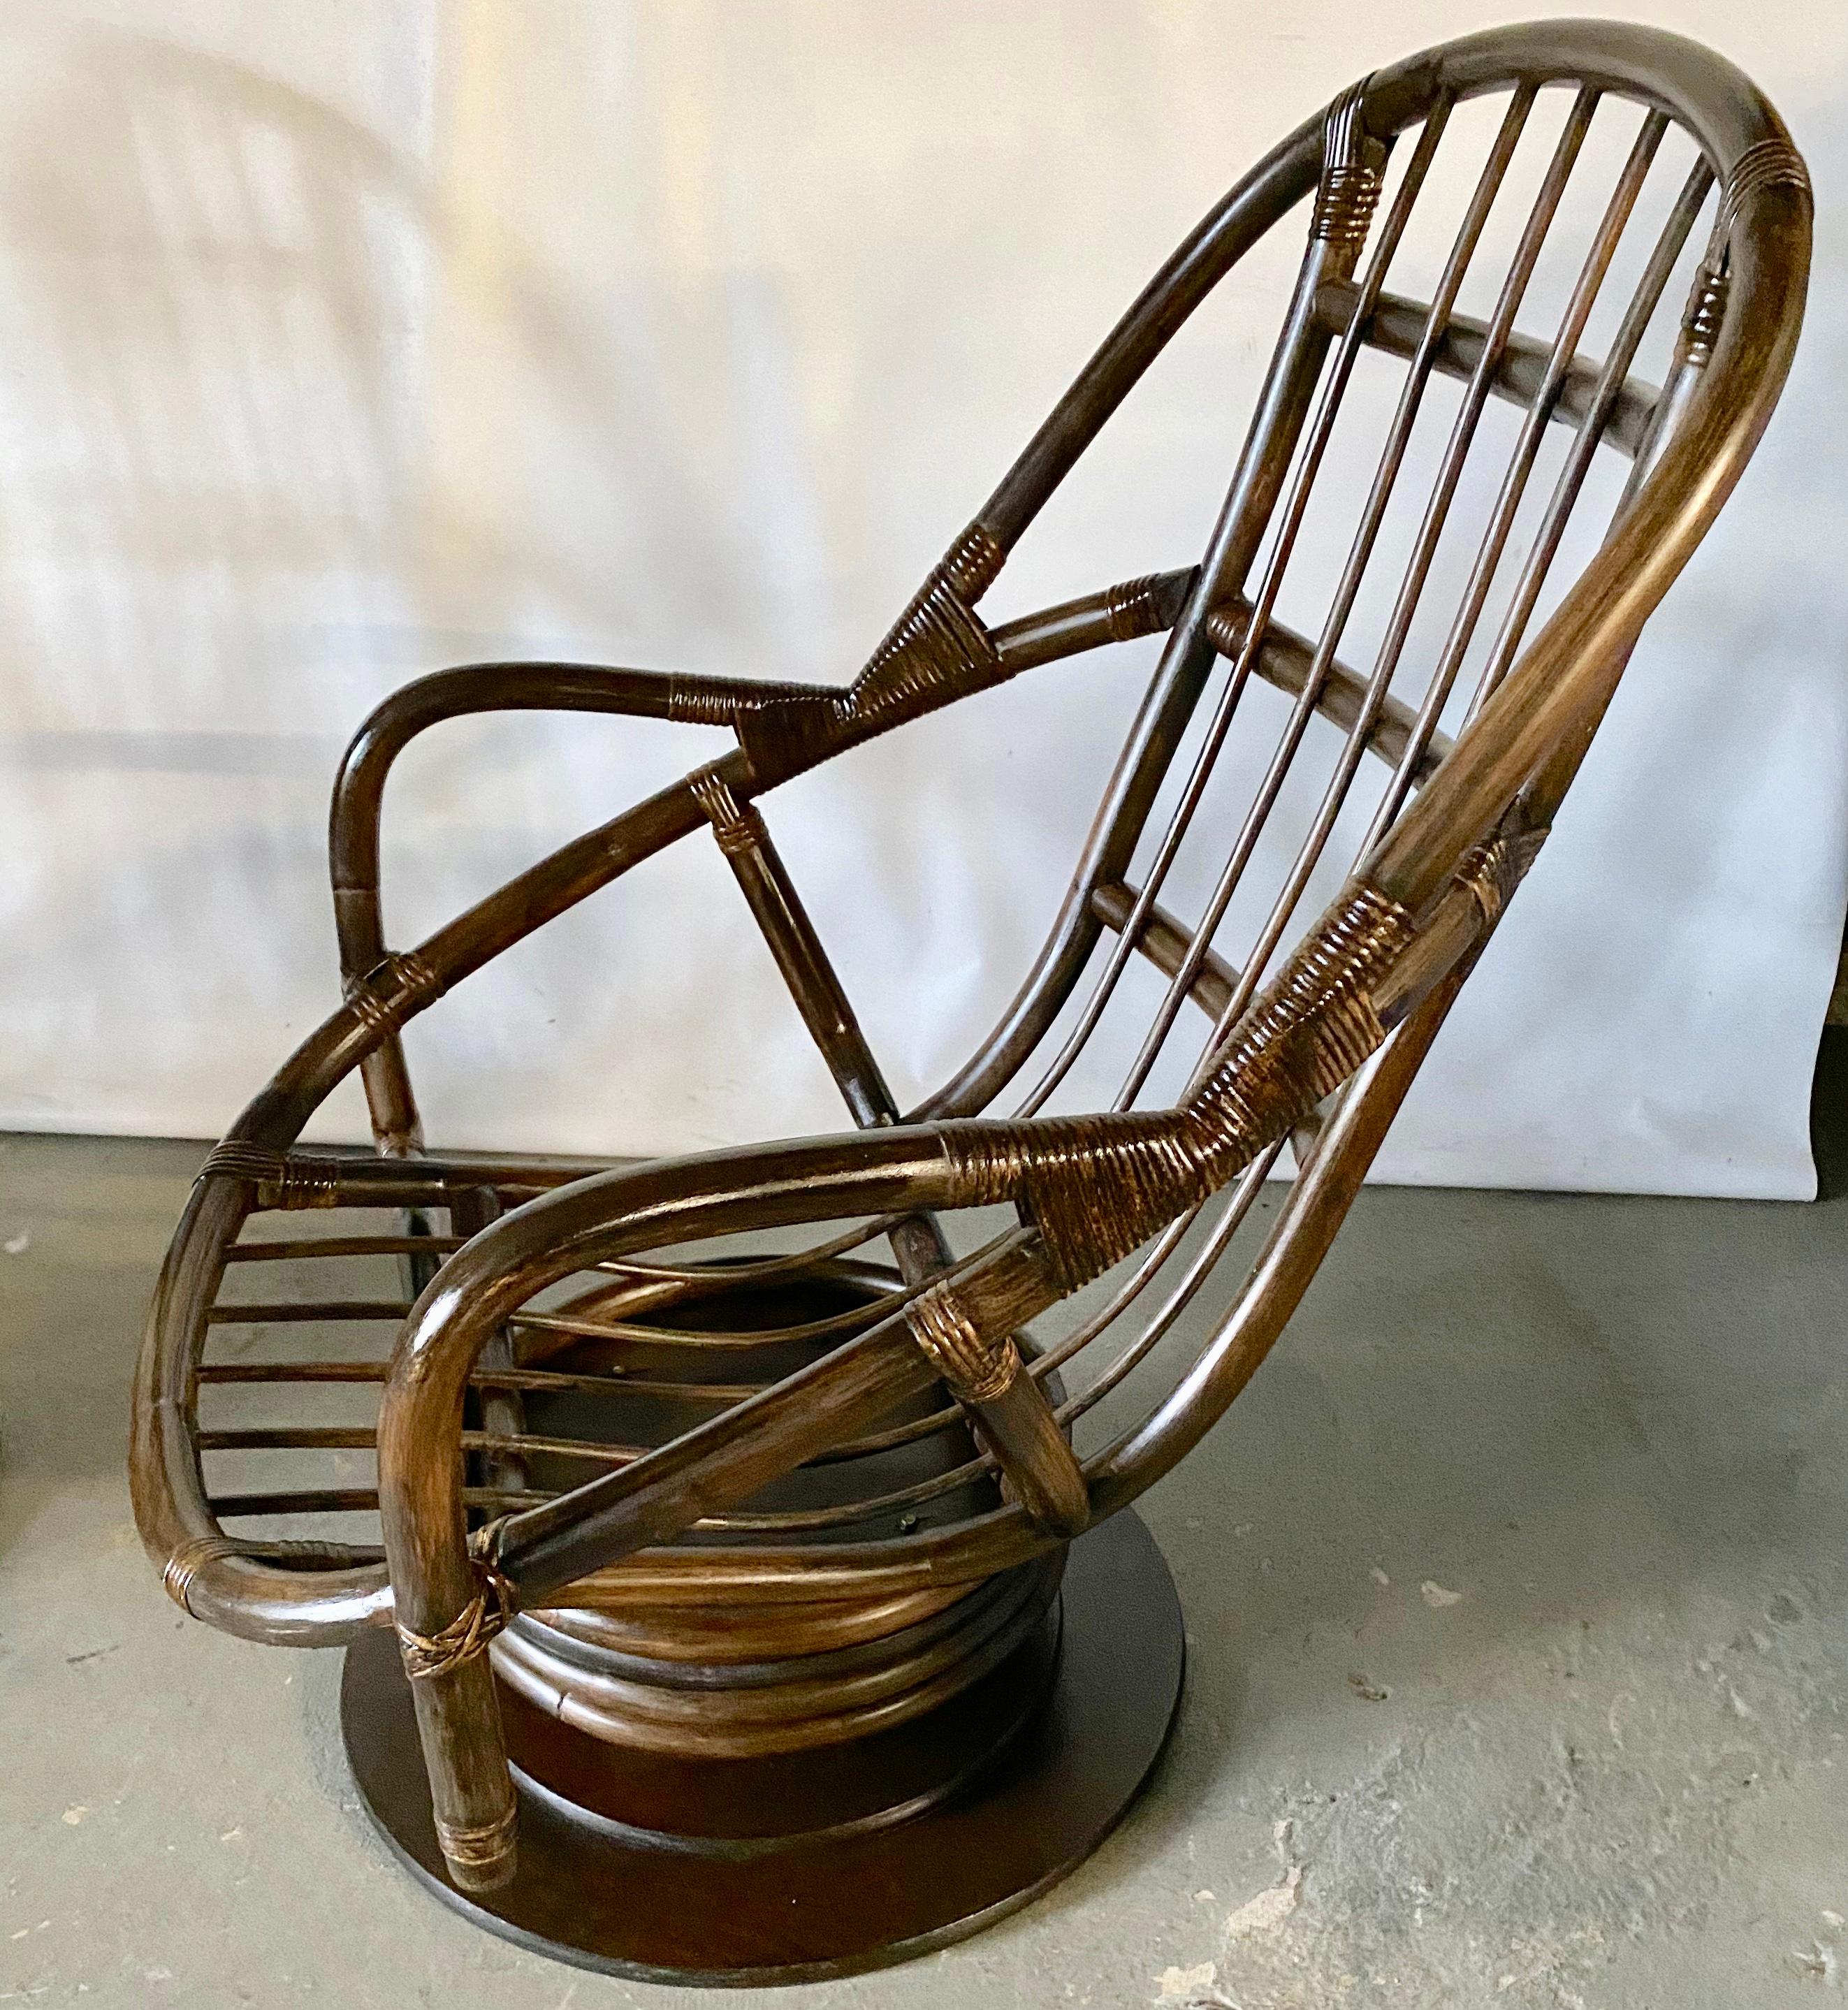 Pair of very comfortable and elegant bamboo lounge chairs with bucket shape seats. These chairs have a dark stain with a wonderful swivel motion to make them welcoming and comfortable to relax in. They will work well in any decor or setting.
Search